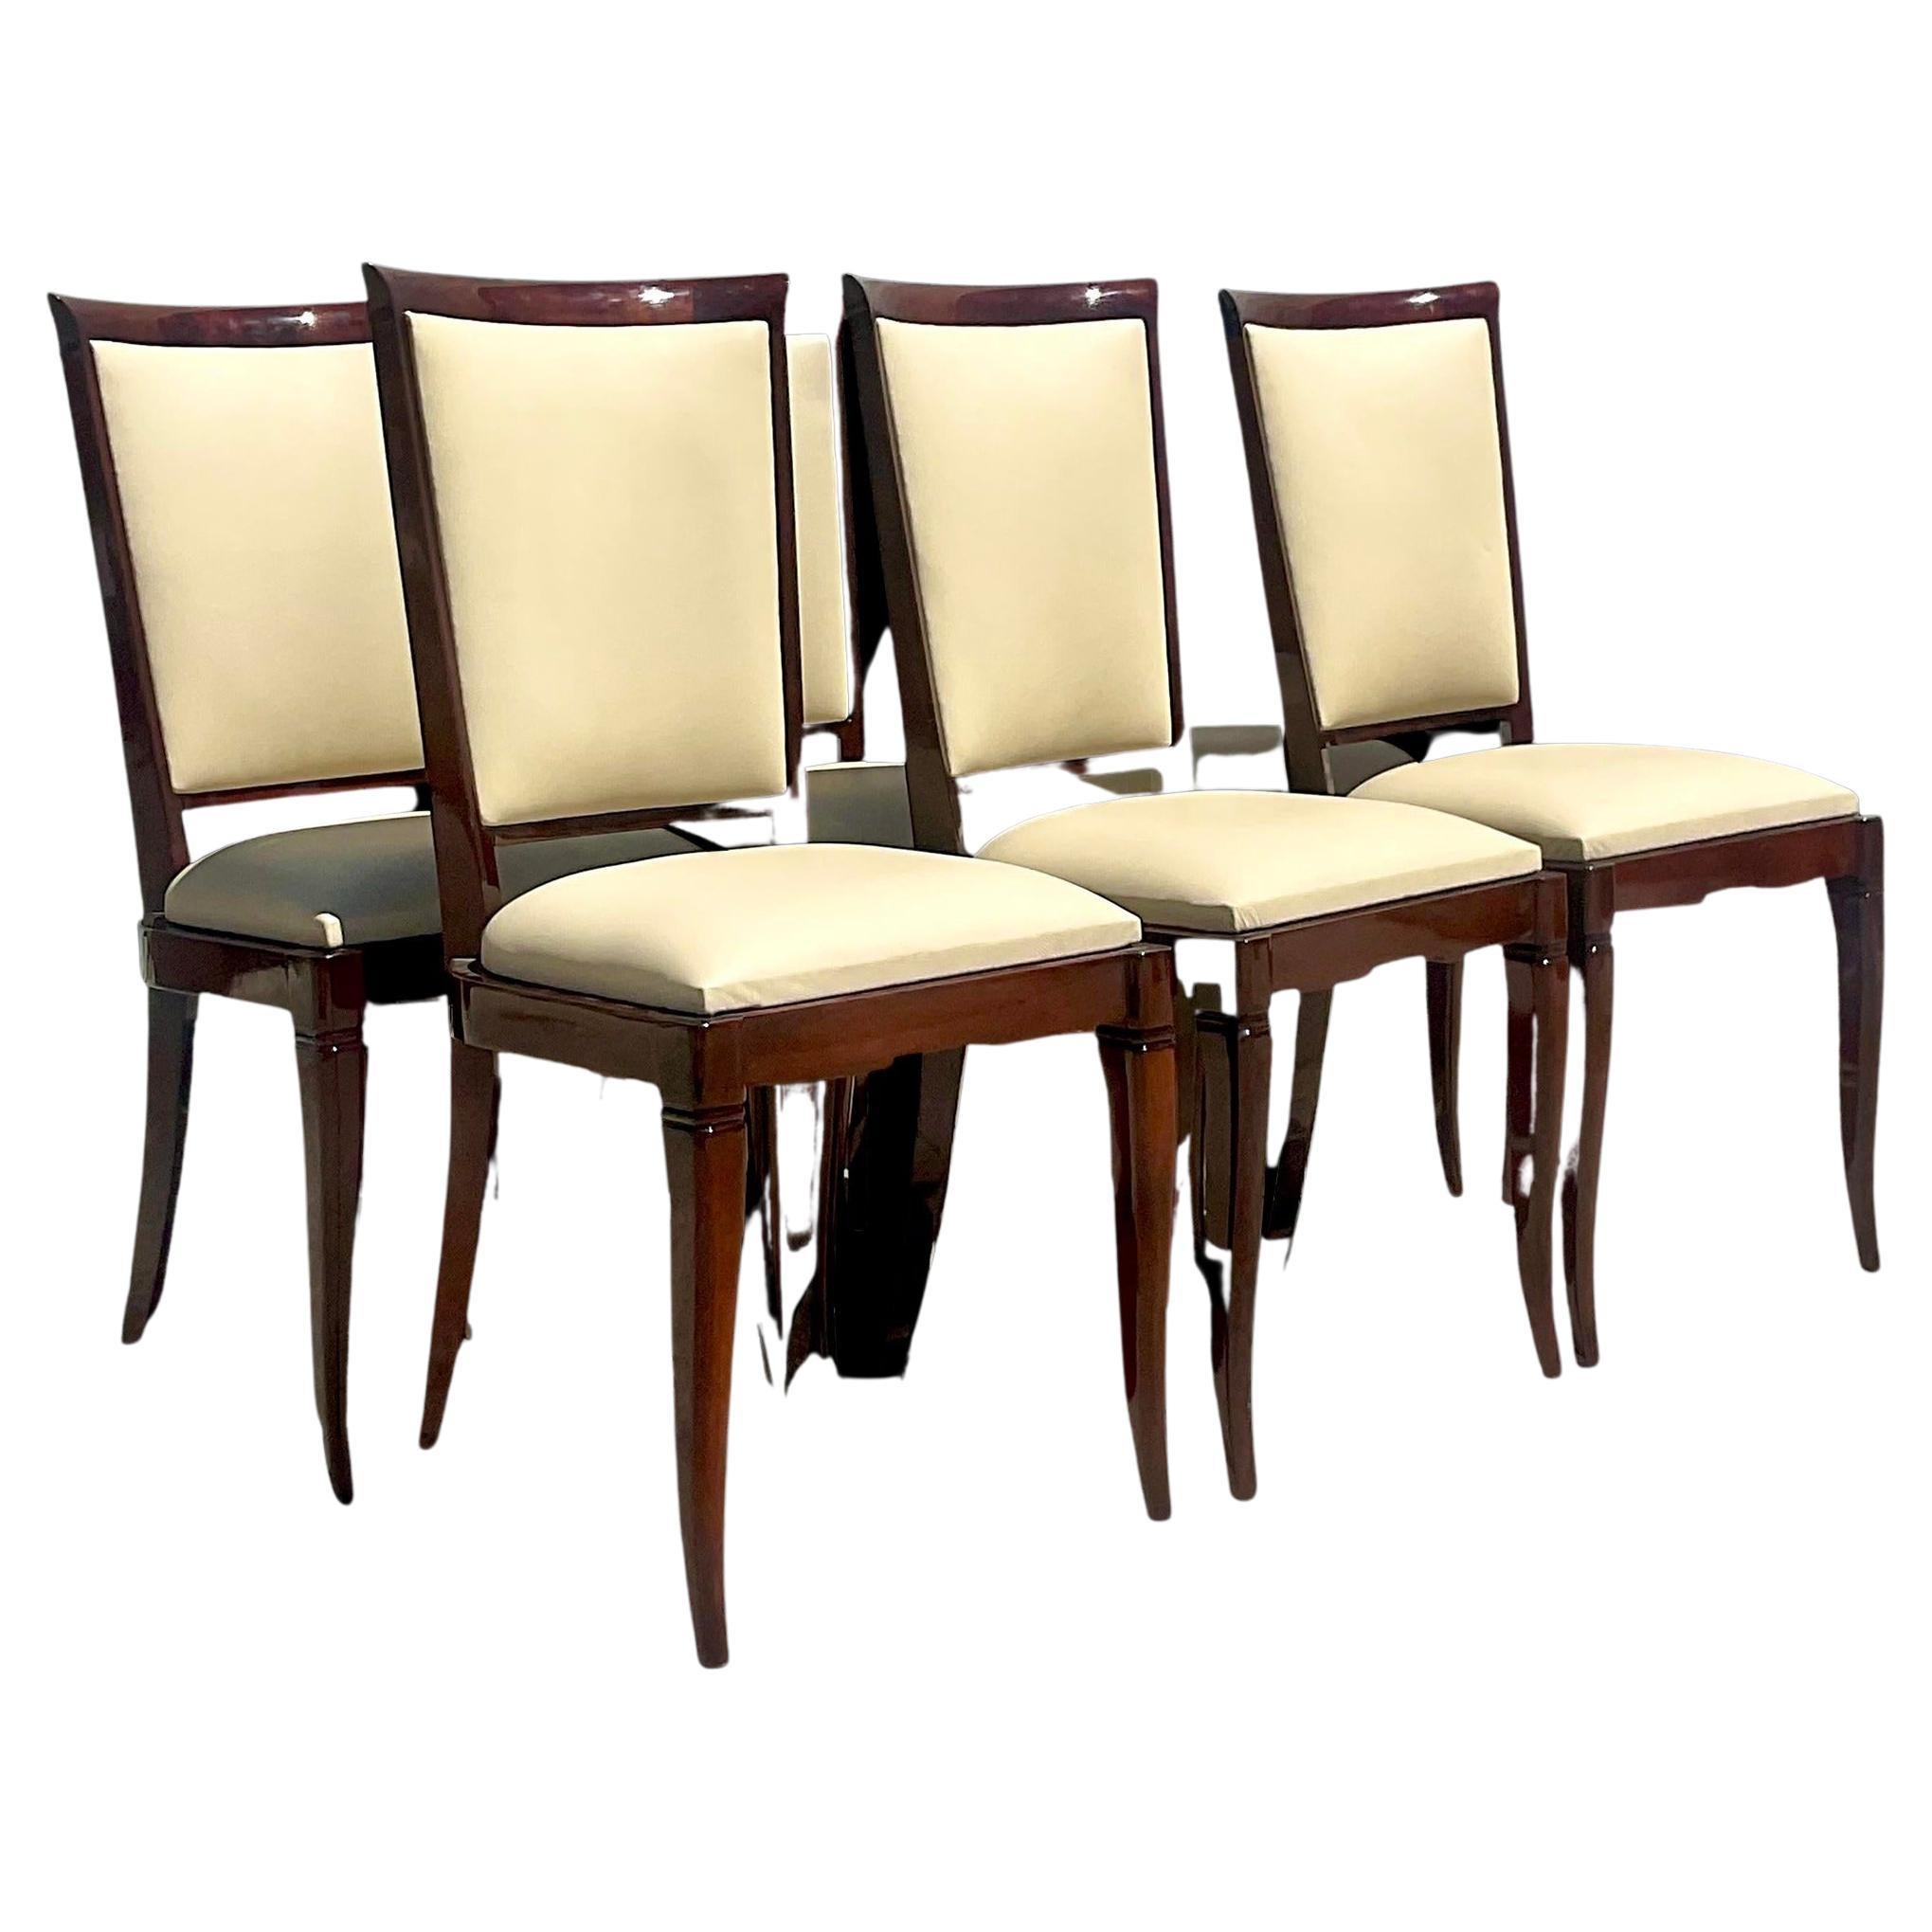 Vintage Art Deco Lacquered Burl Wood and Leather Dining Chairs, Set of 6